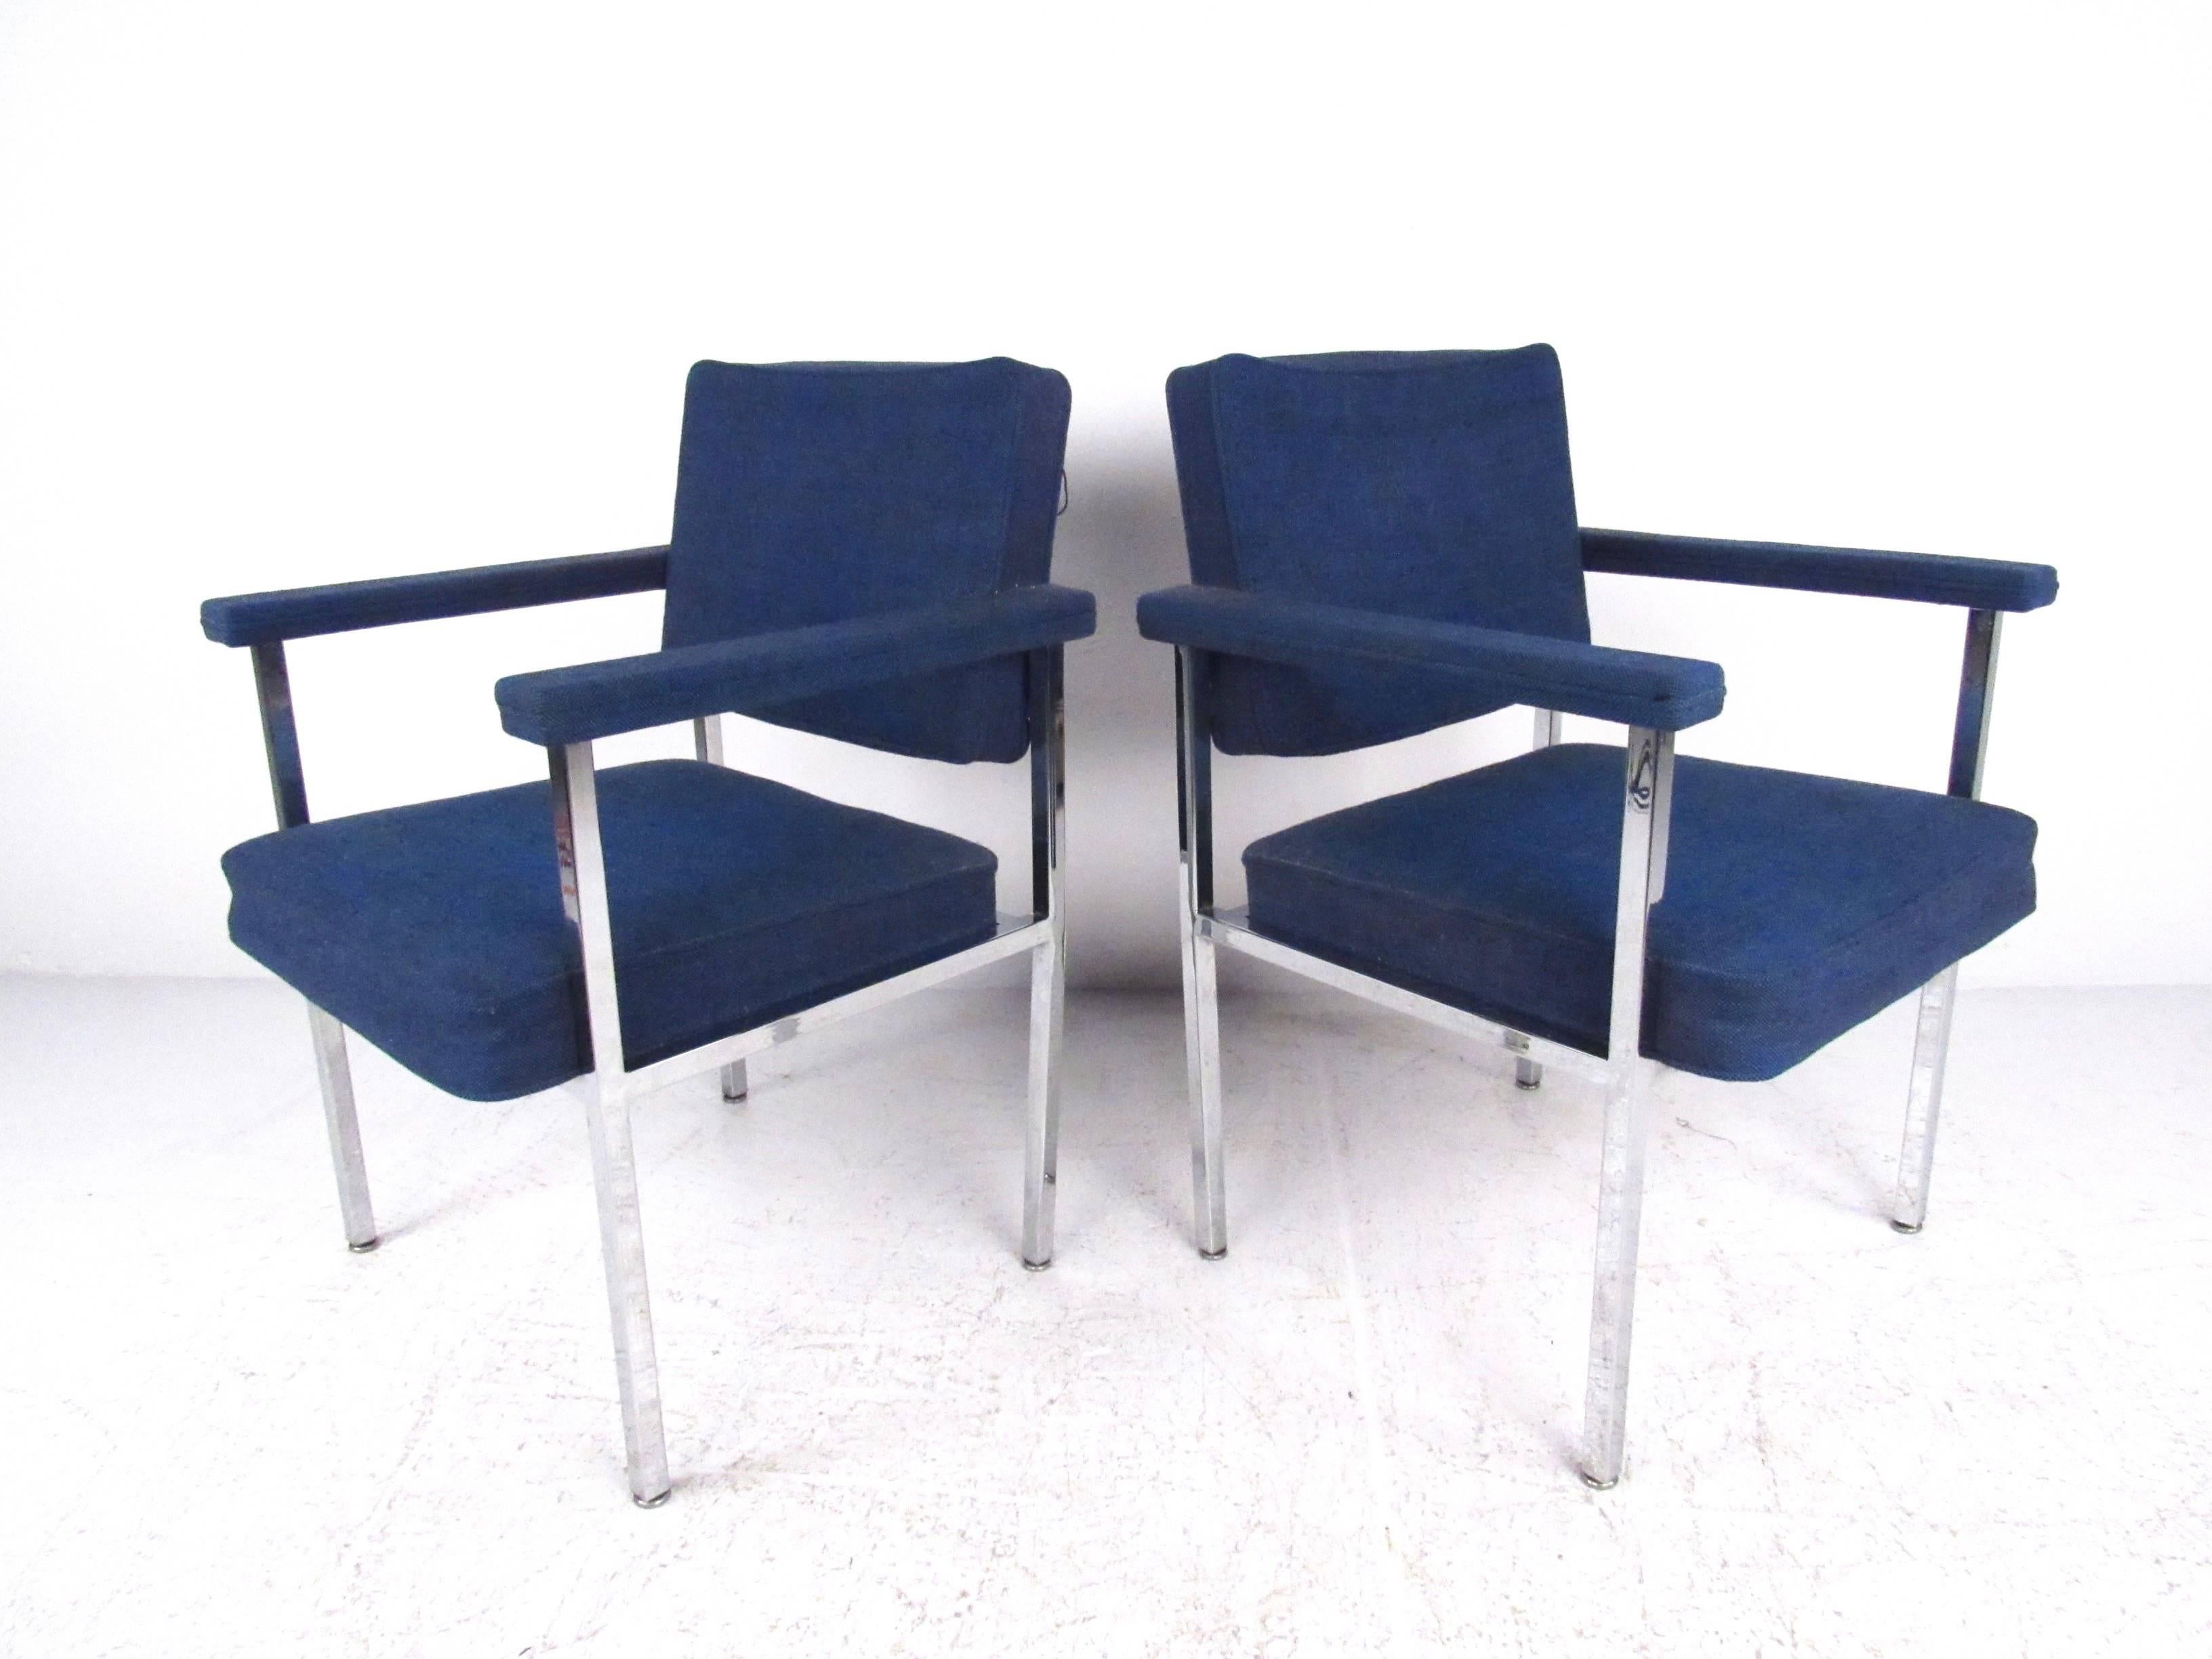 This stylish pair of Mid-Century armchairs make a comfortable vintage addition to any setting. With comfortably padded seats and sturdy chrome frames set this matching pair apart from other modern seating options. Please confirm item location (NY or